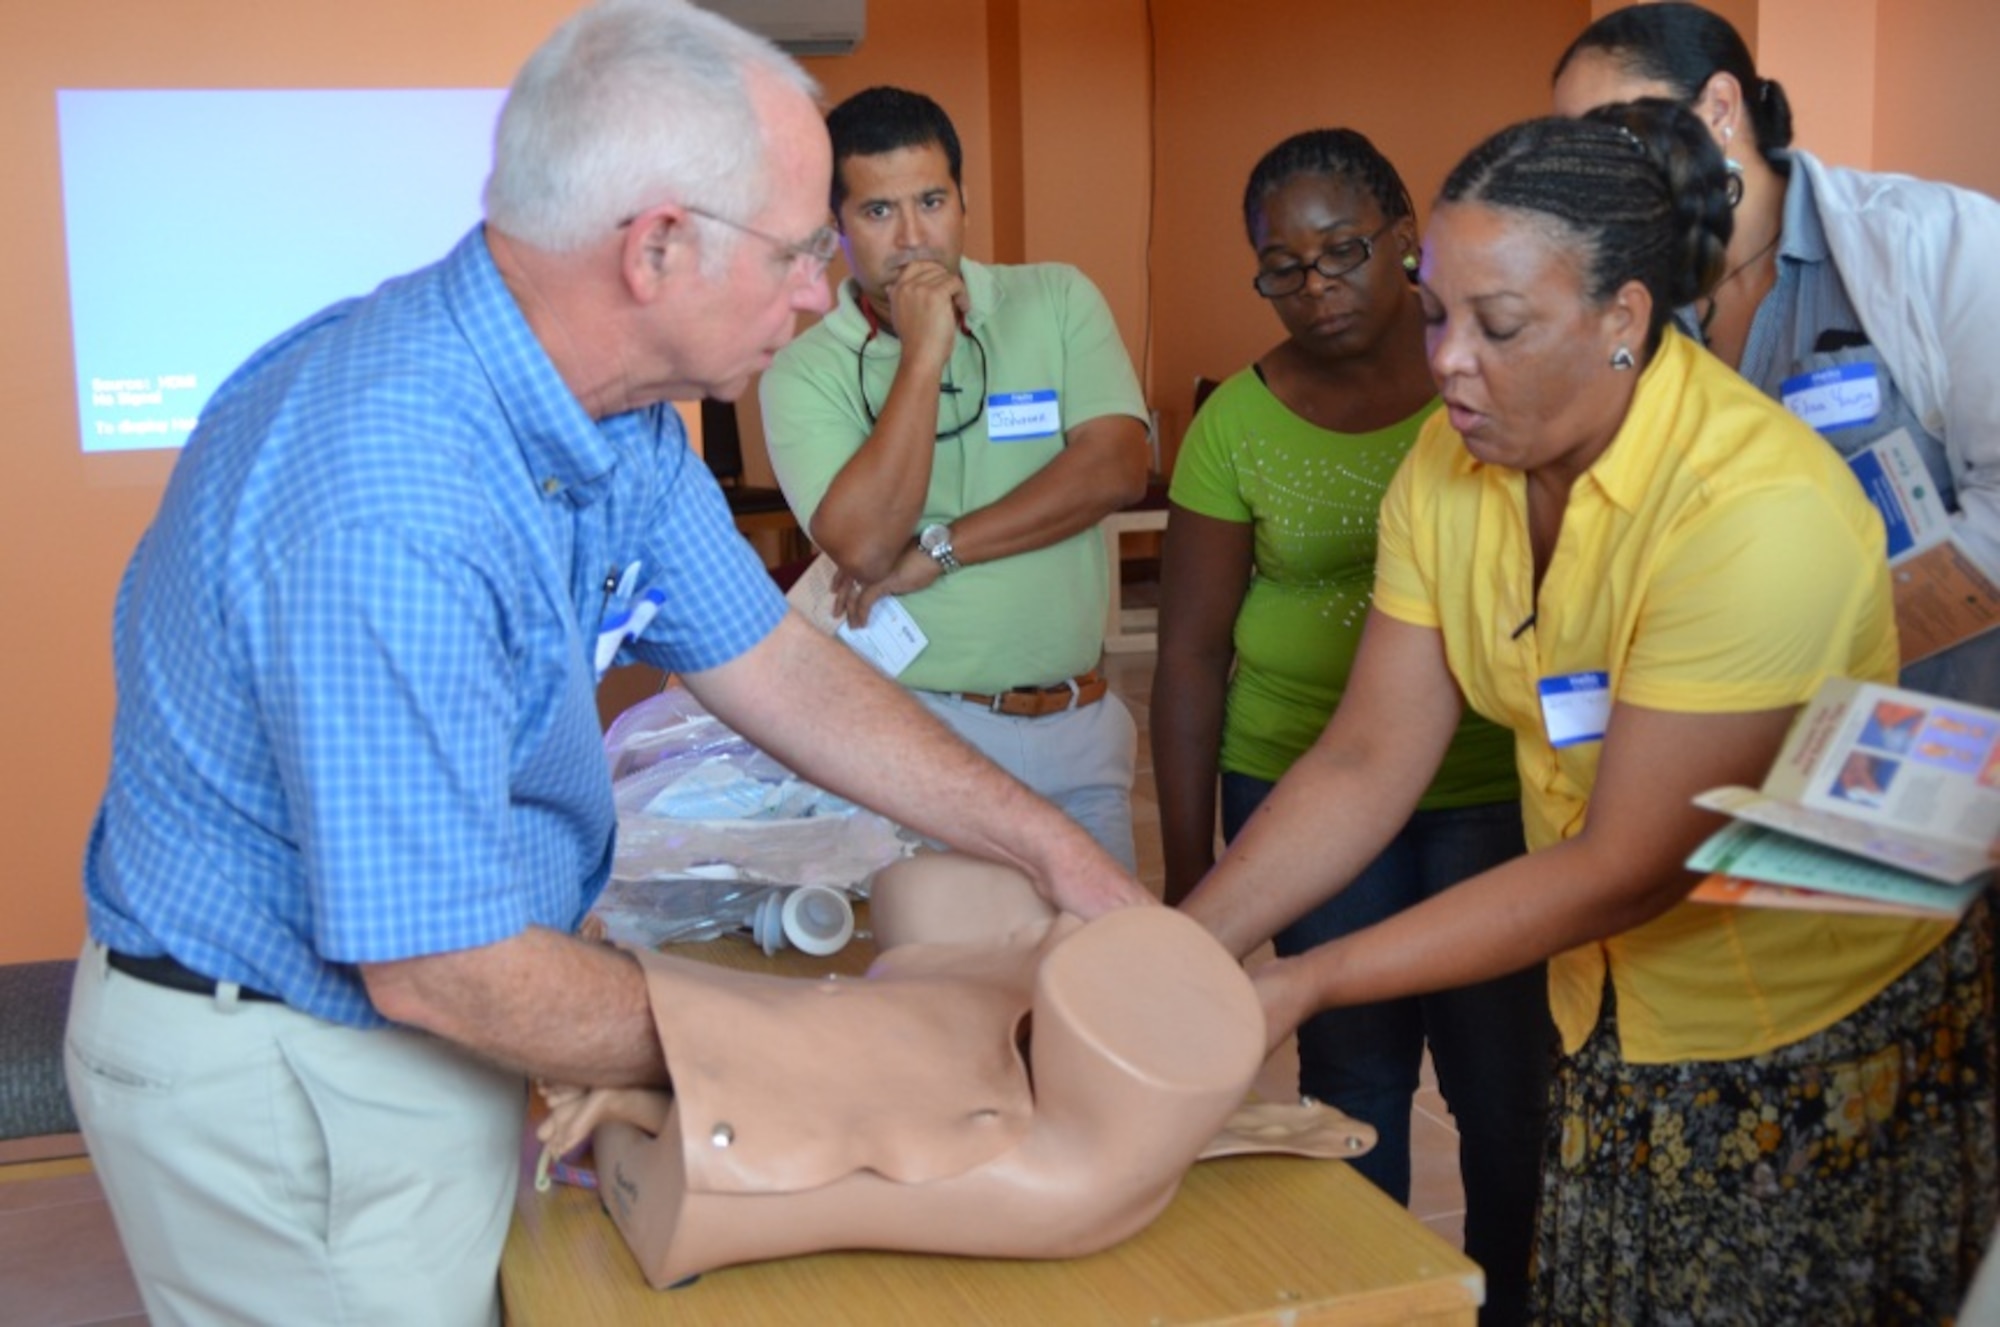 Dr. Robert Persons, Doctor of Osteopathic Medicine and Fellow of the American Academy of Family Practice and Joan Arana teach a group of Belizean healthcare professionals how to perform an assisted vaginal delivery during the Global Advanced Life Support in Obstetrics Instructor Course in Belize City, Belize, July 23, 2014. (Courtesy Photo)